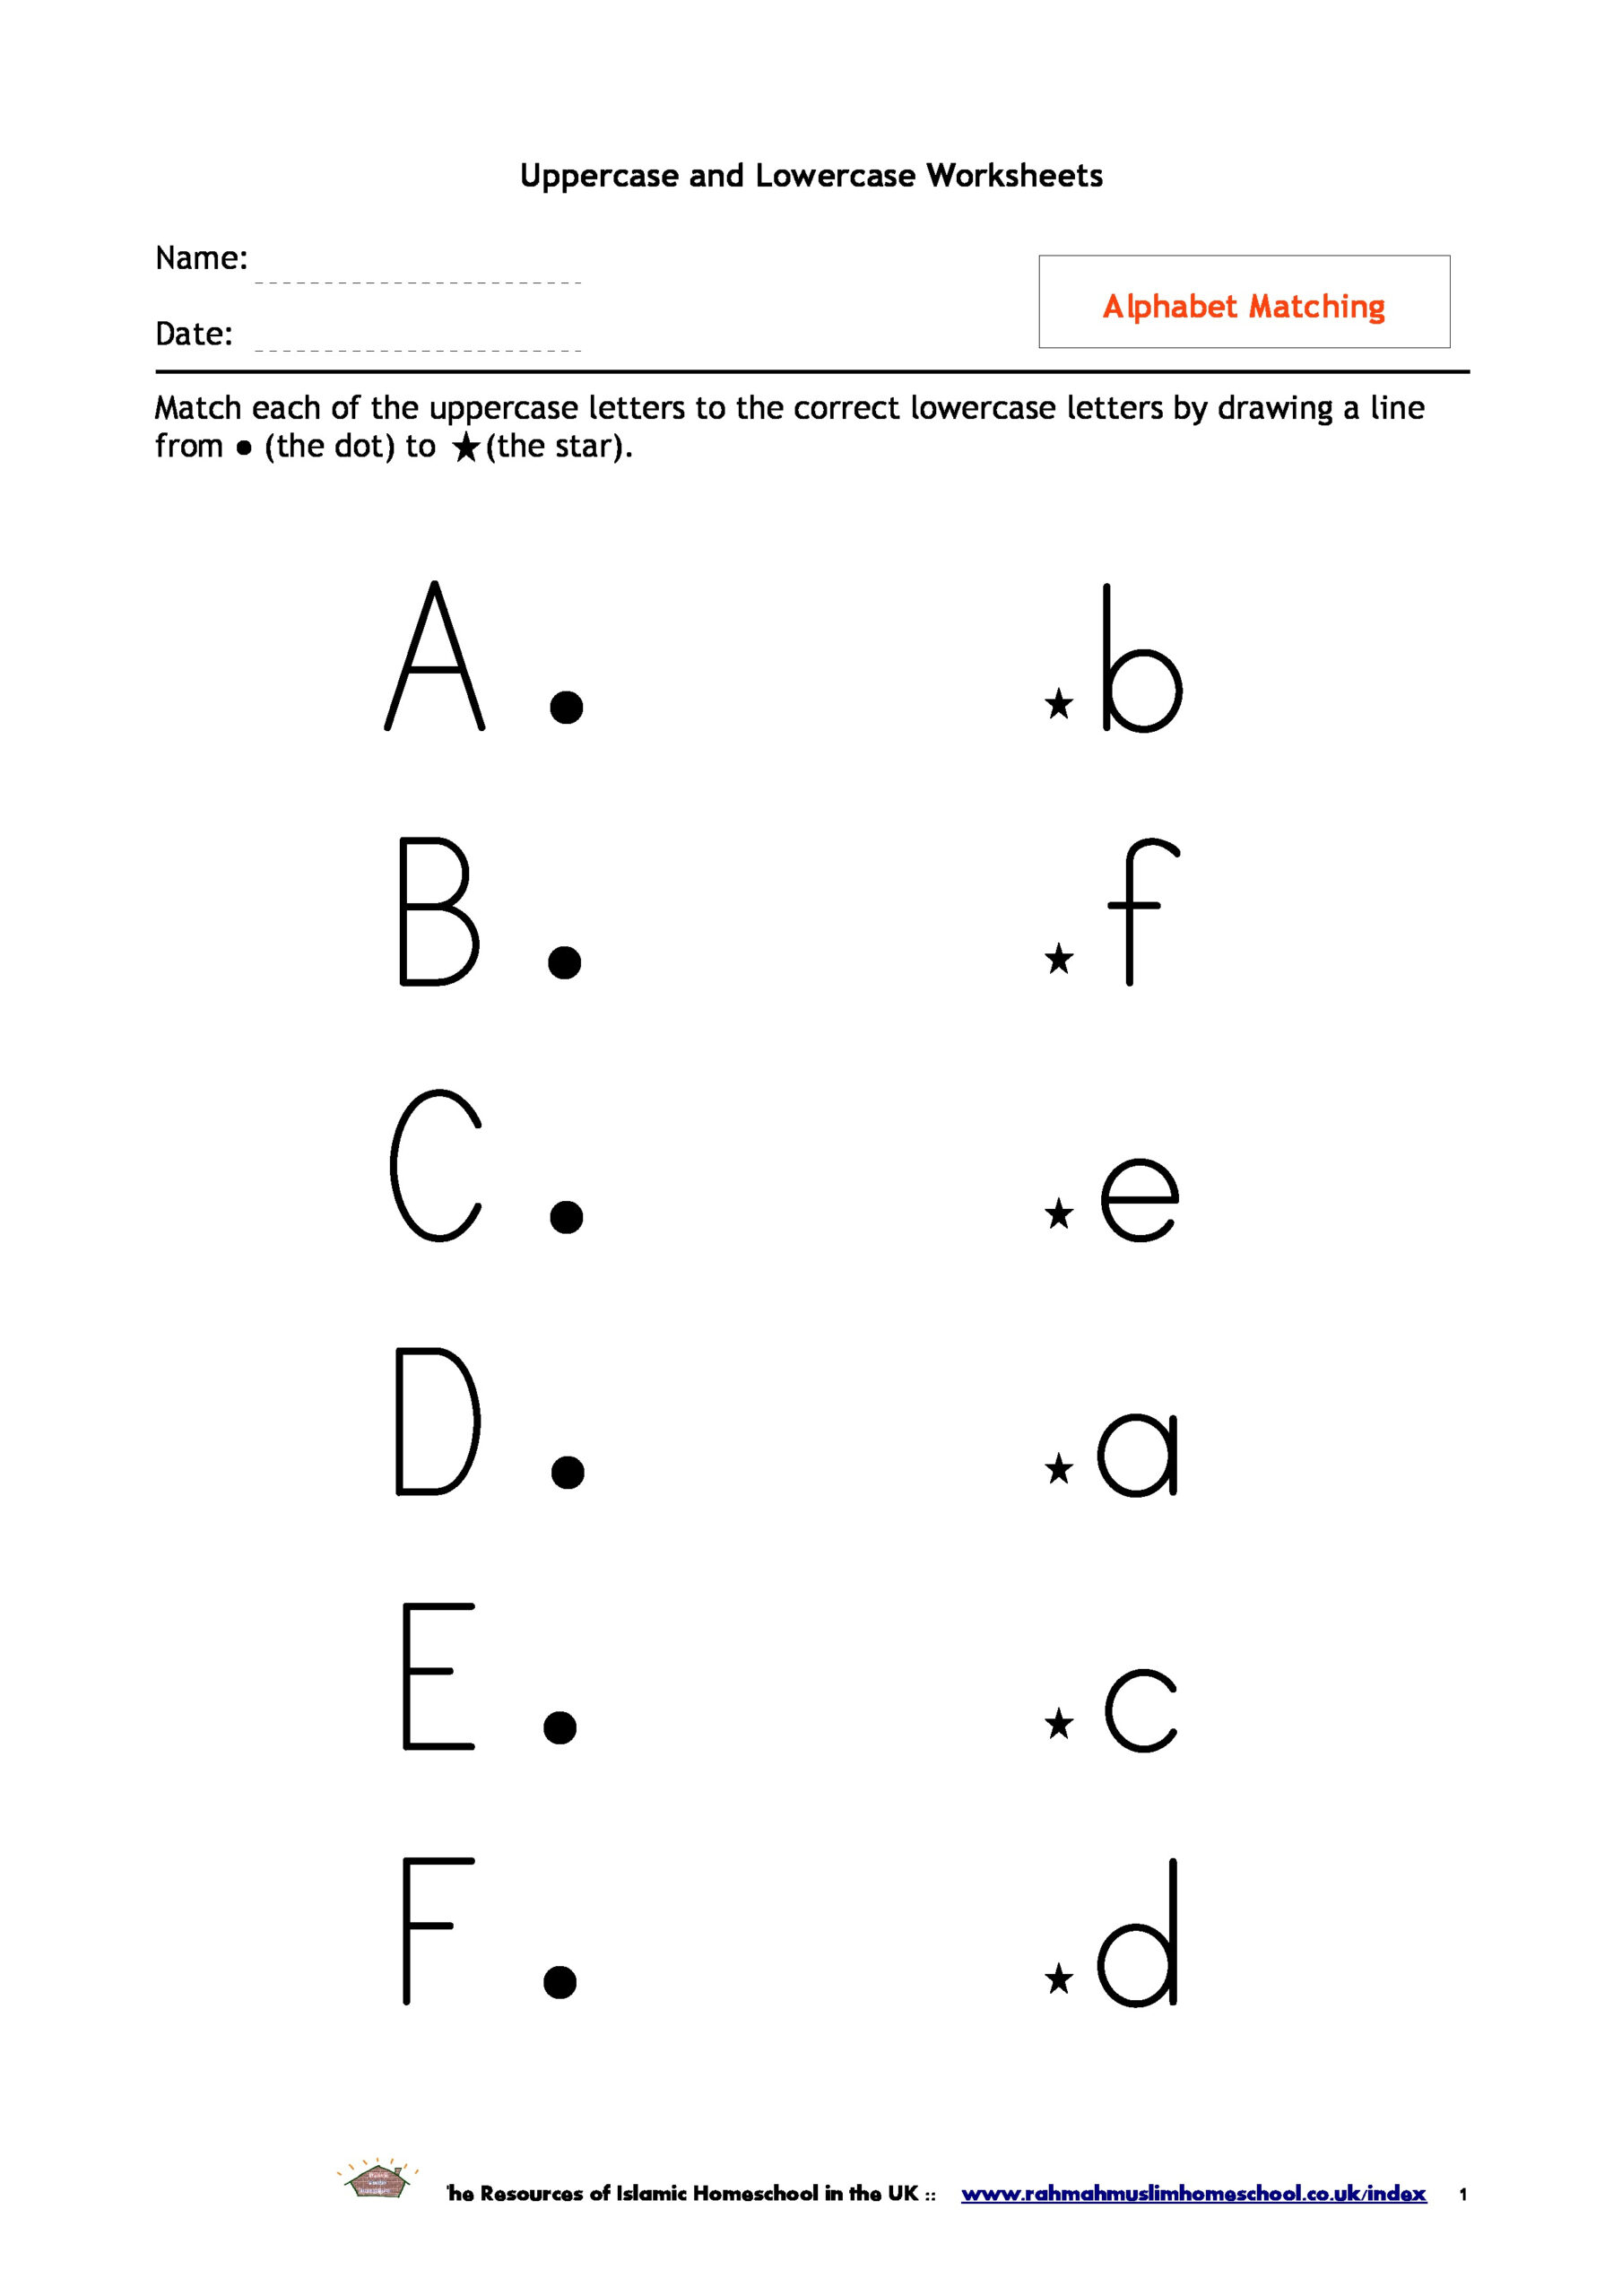 Alphabet Matching Worksheets For Nursery regarding Alphabet Matching Worksheets For Pre-K